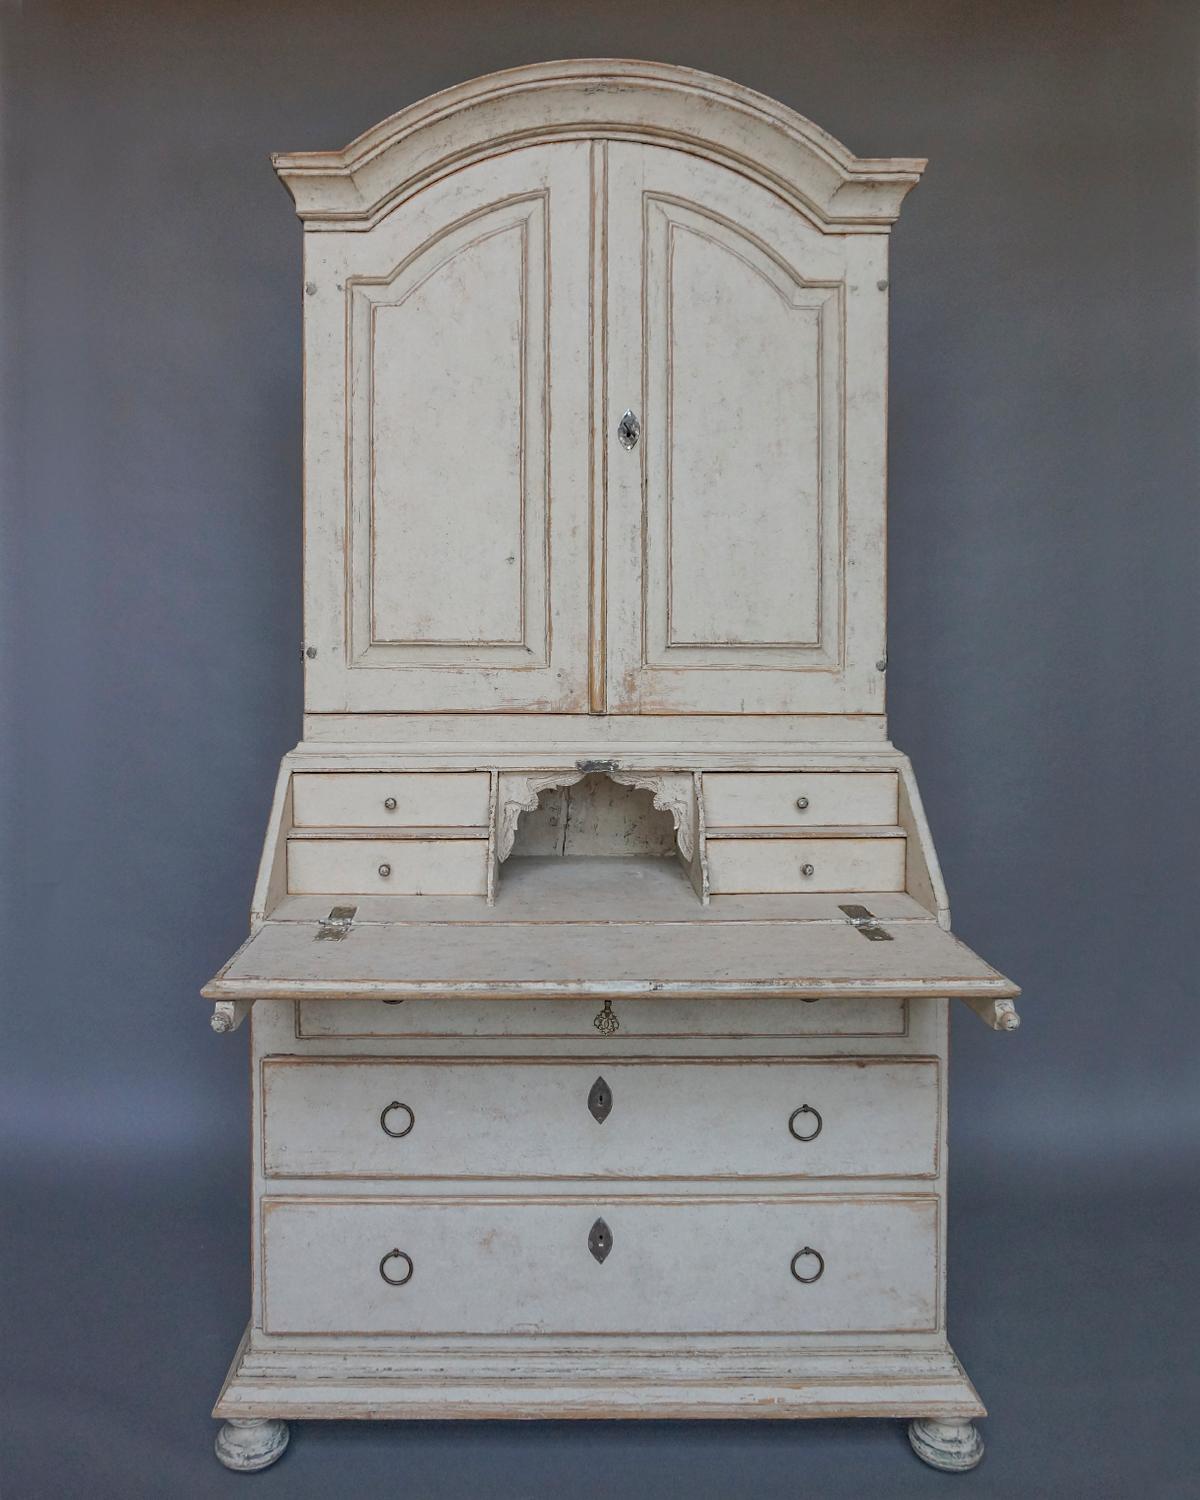 Period Gustavian secretary in two parts, Sweden, circa 1830. The upper library section has a graceful arched cornice with double raised-panel doors. Inside are three fixed shelves, the top one having a concave form with notches for spoons. The lower